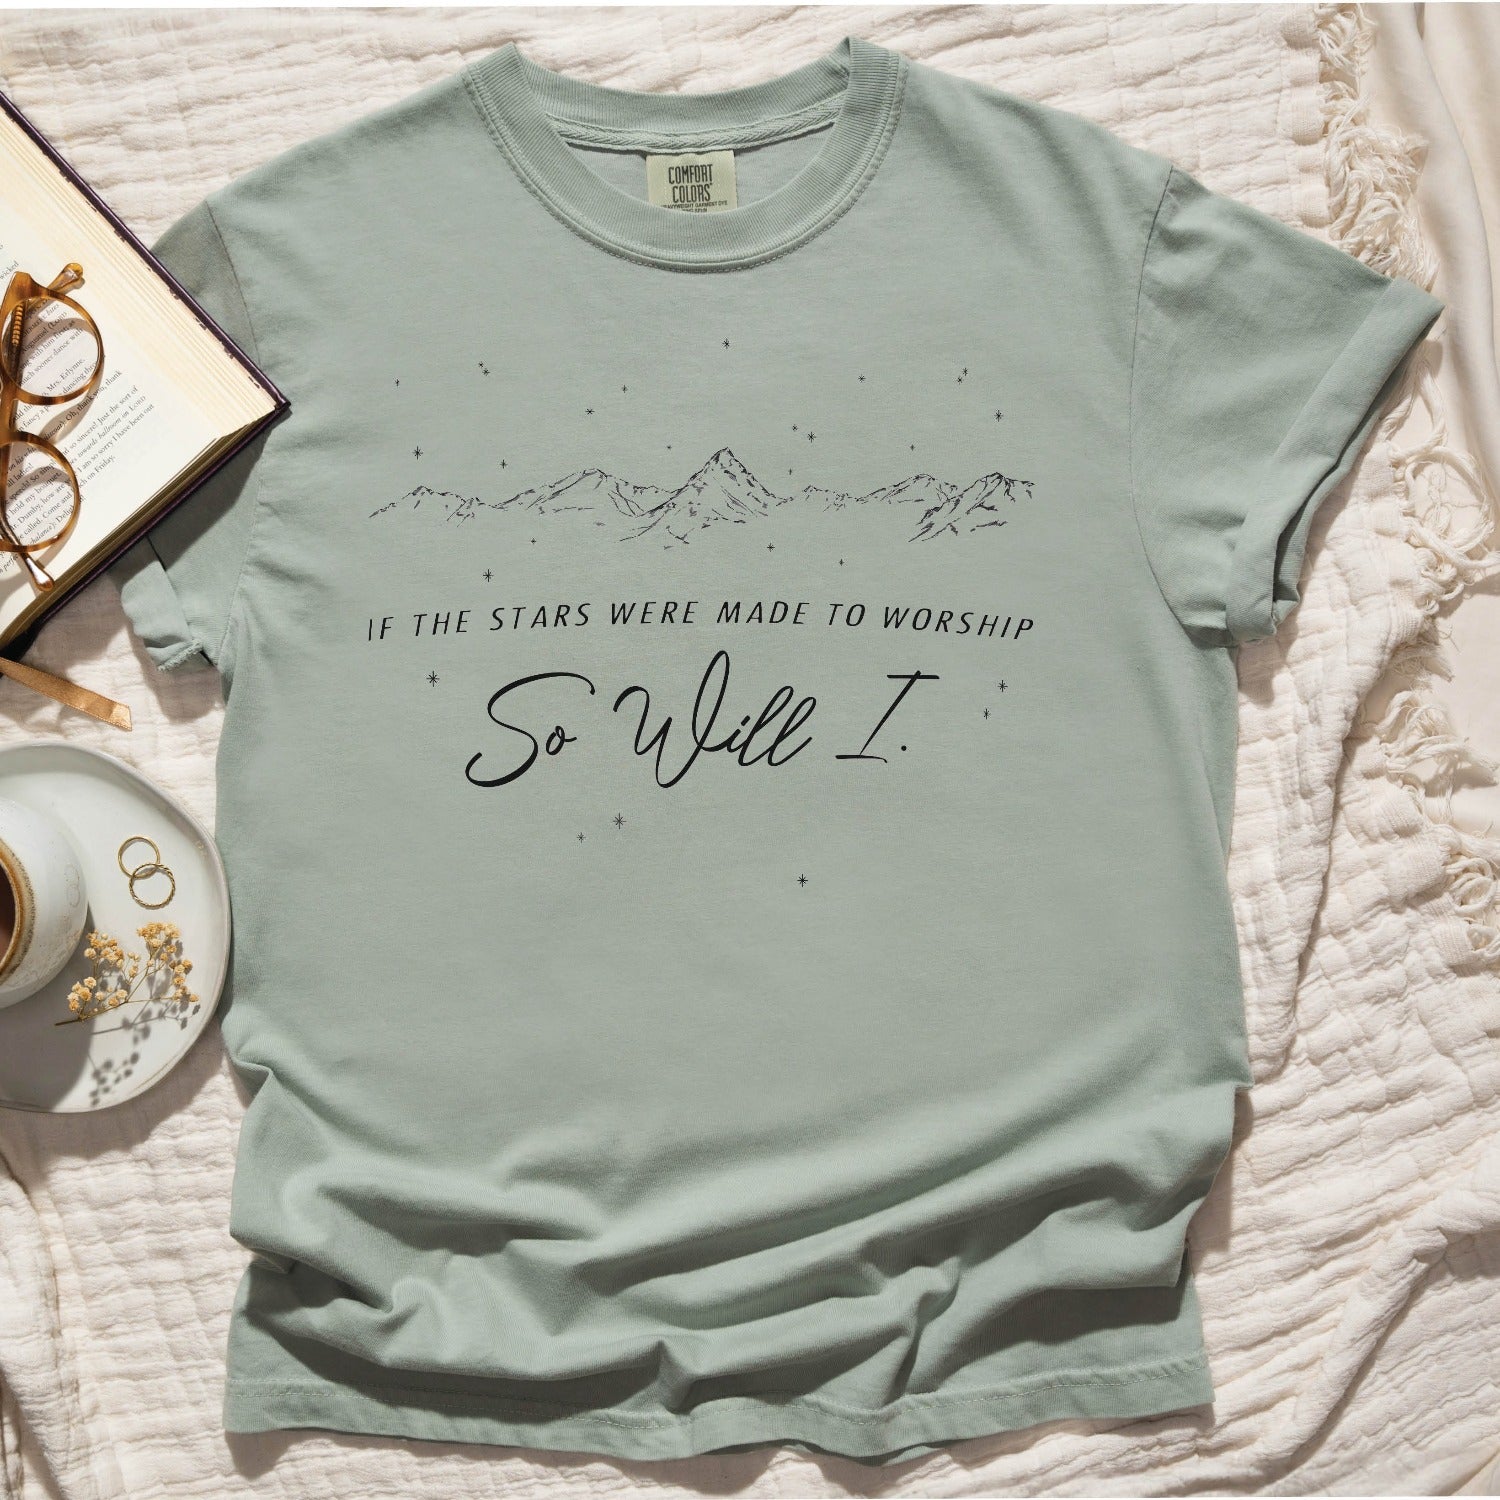 Bay sage green color garment-dyed unisex Comfort Colors 1717 t-shirt with black mountain range and starry sky that says this faith-based bible verse quote, "If the Stars Were Made to Worship So Will I", created for Christian men and women Kingdom believers